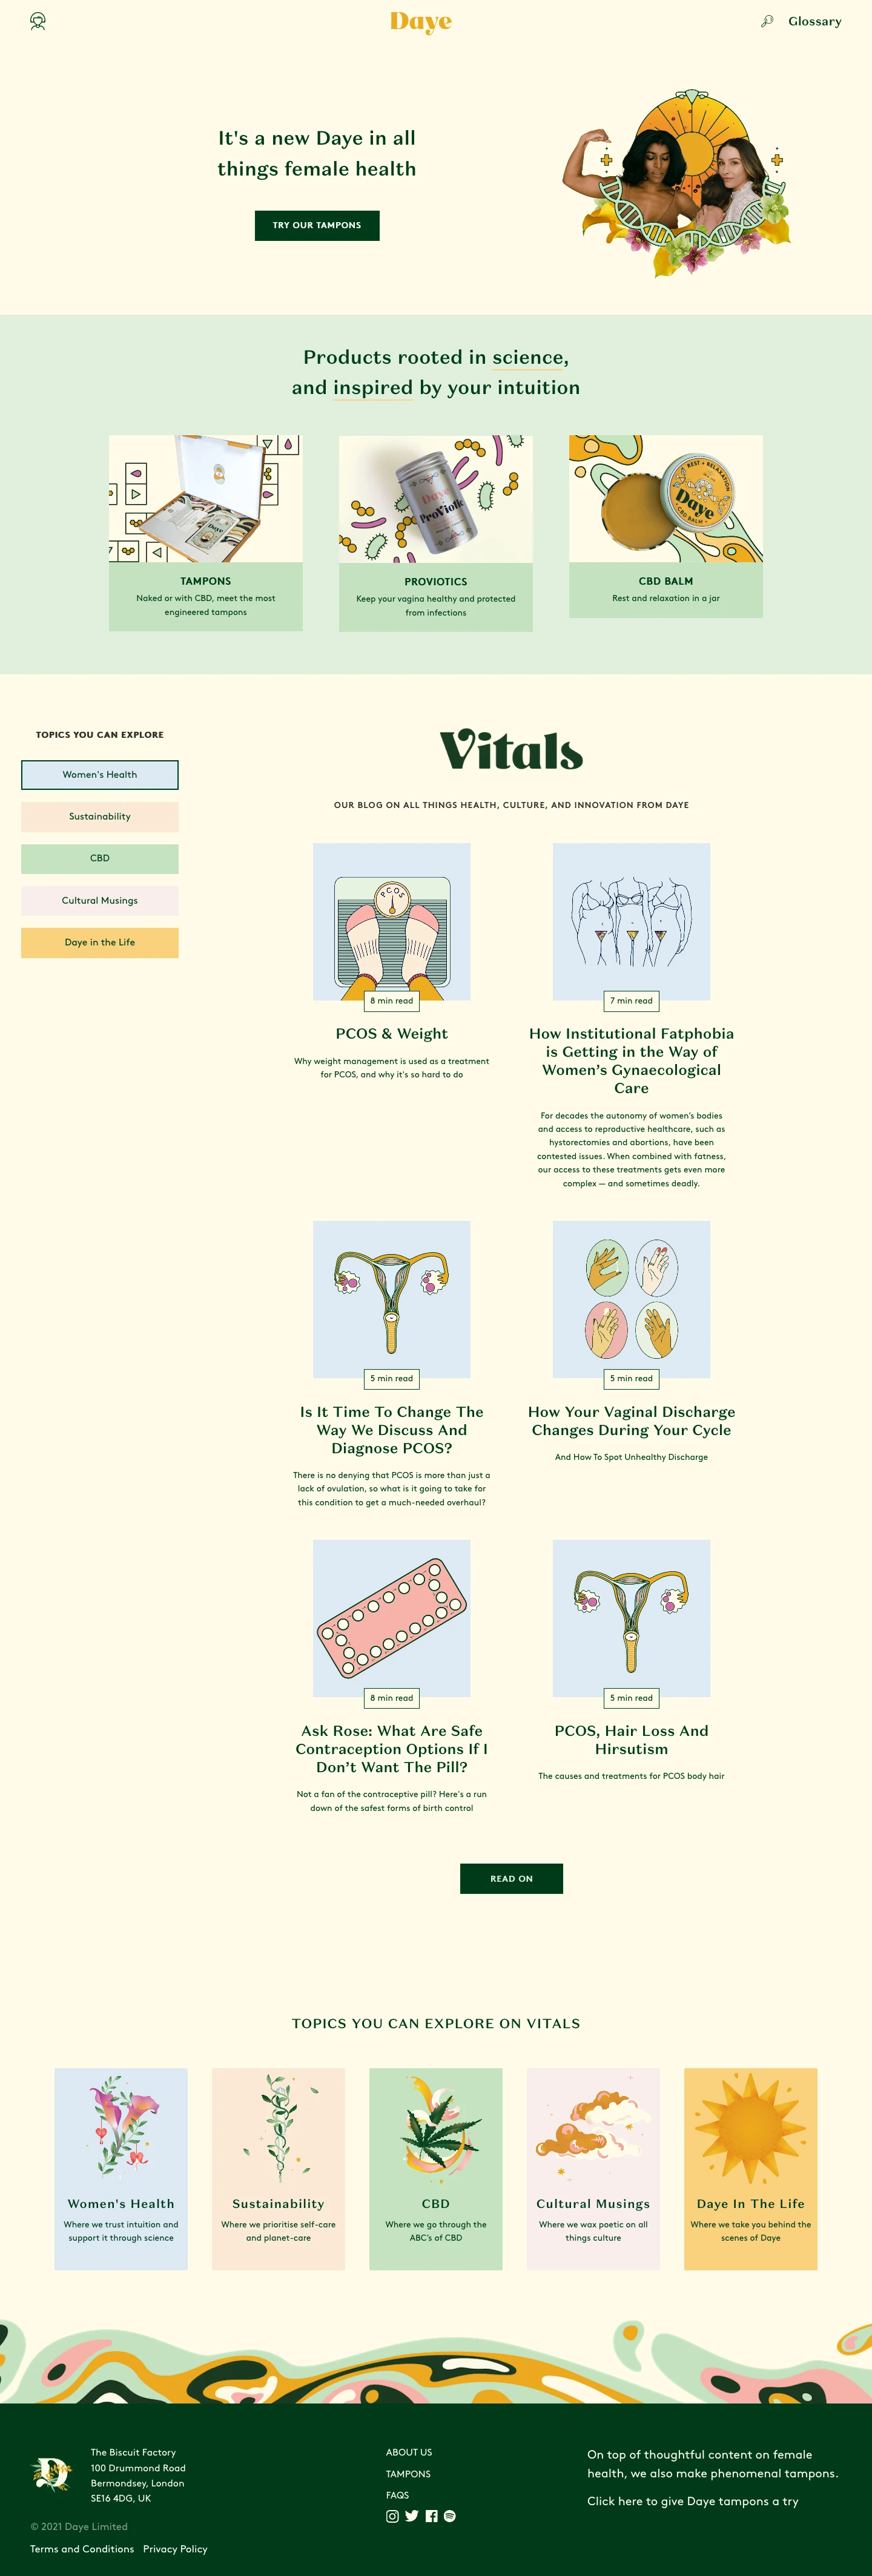 Daye Landing Page Example: Products rooted in science and inspired by female intuition.